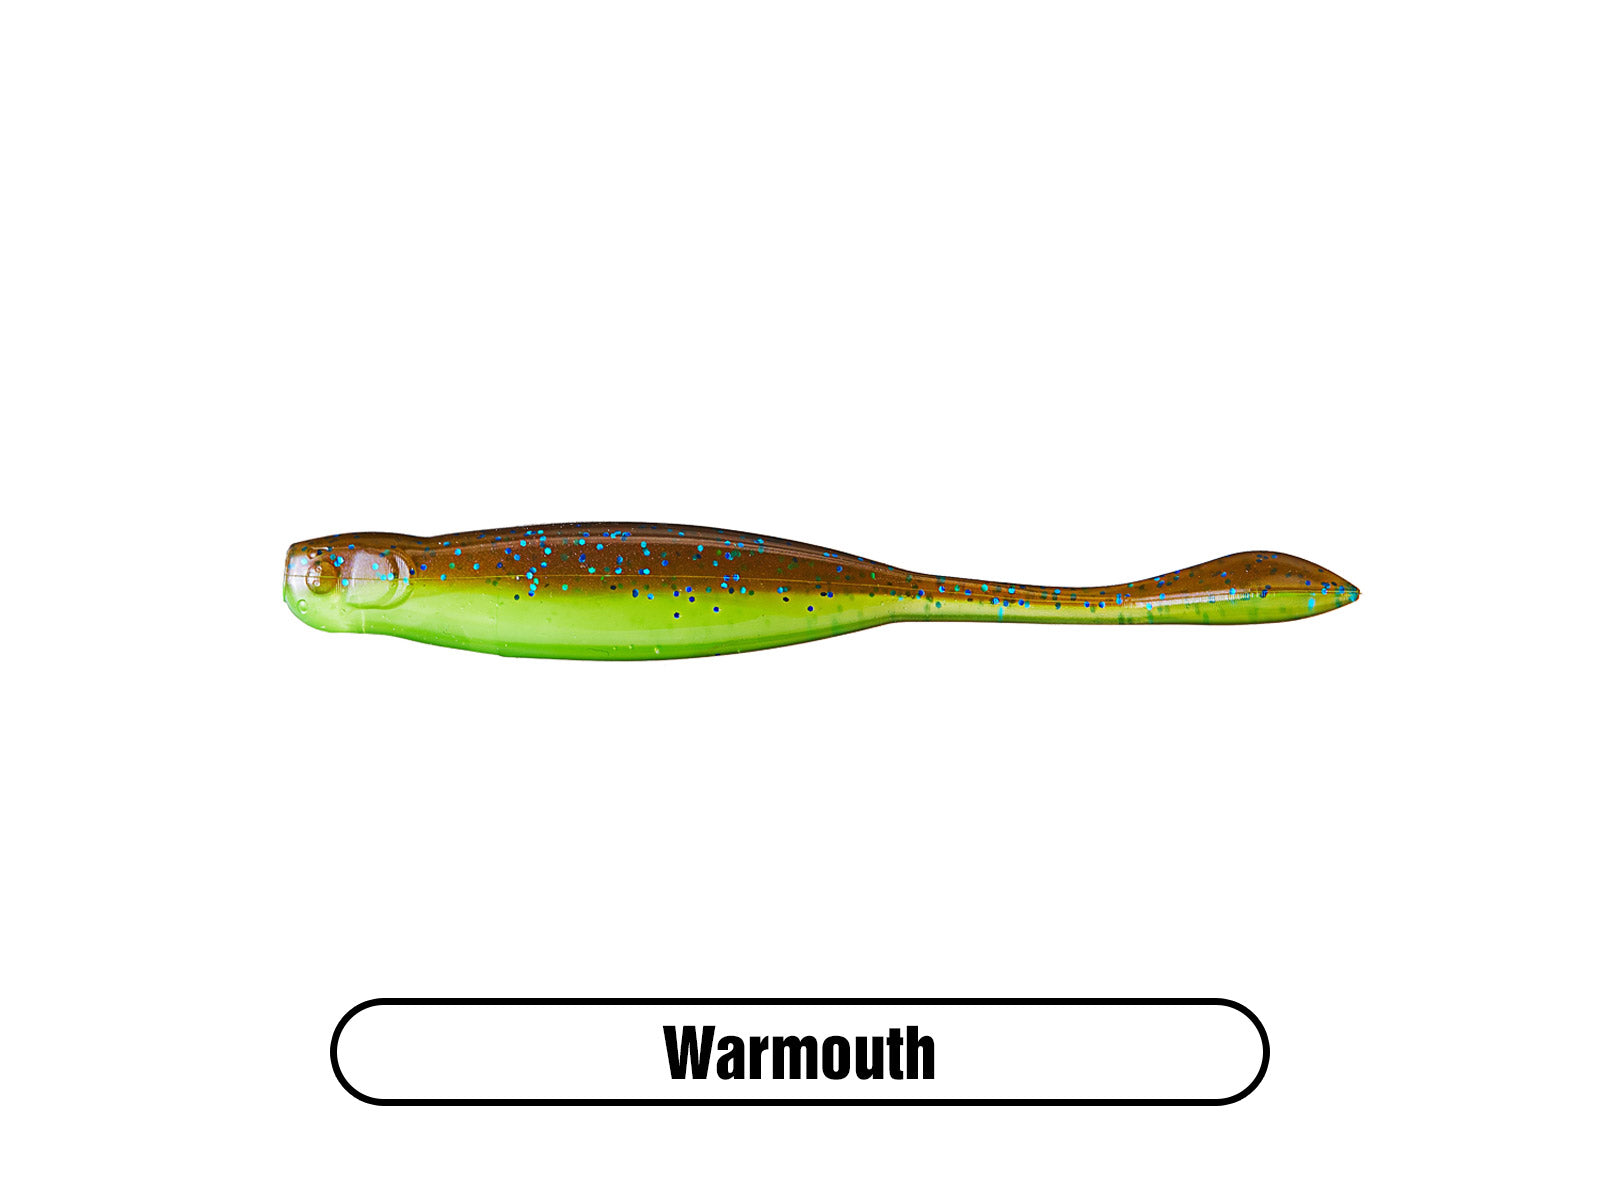 Bright Green Minnow Plastic Fishing Lure Isolated on Black Stock Photo -  Image of small, sparkle: 285469550